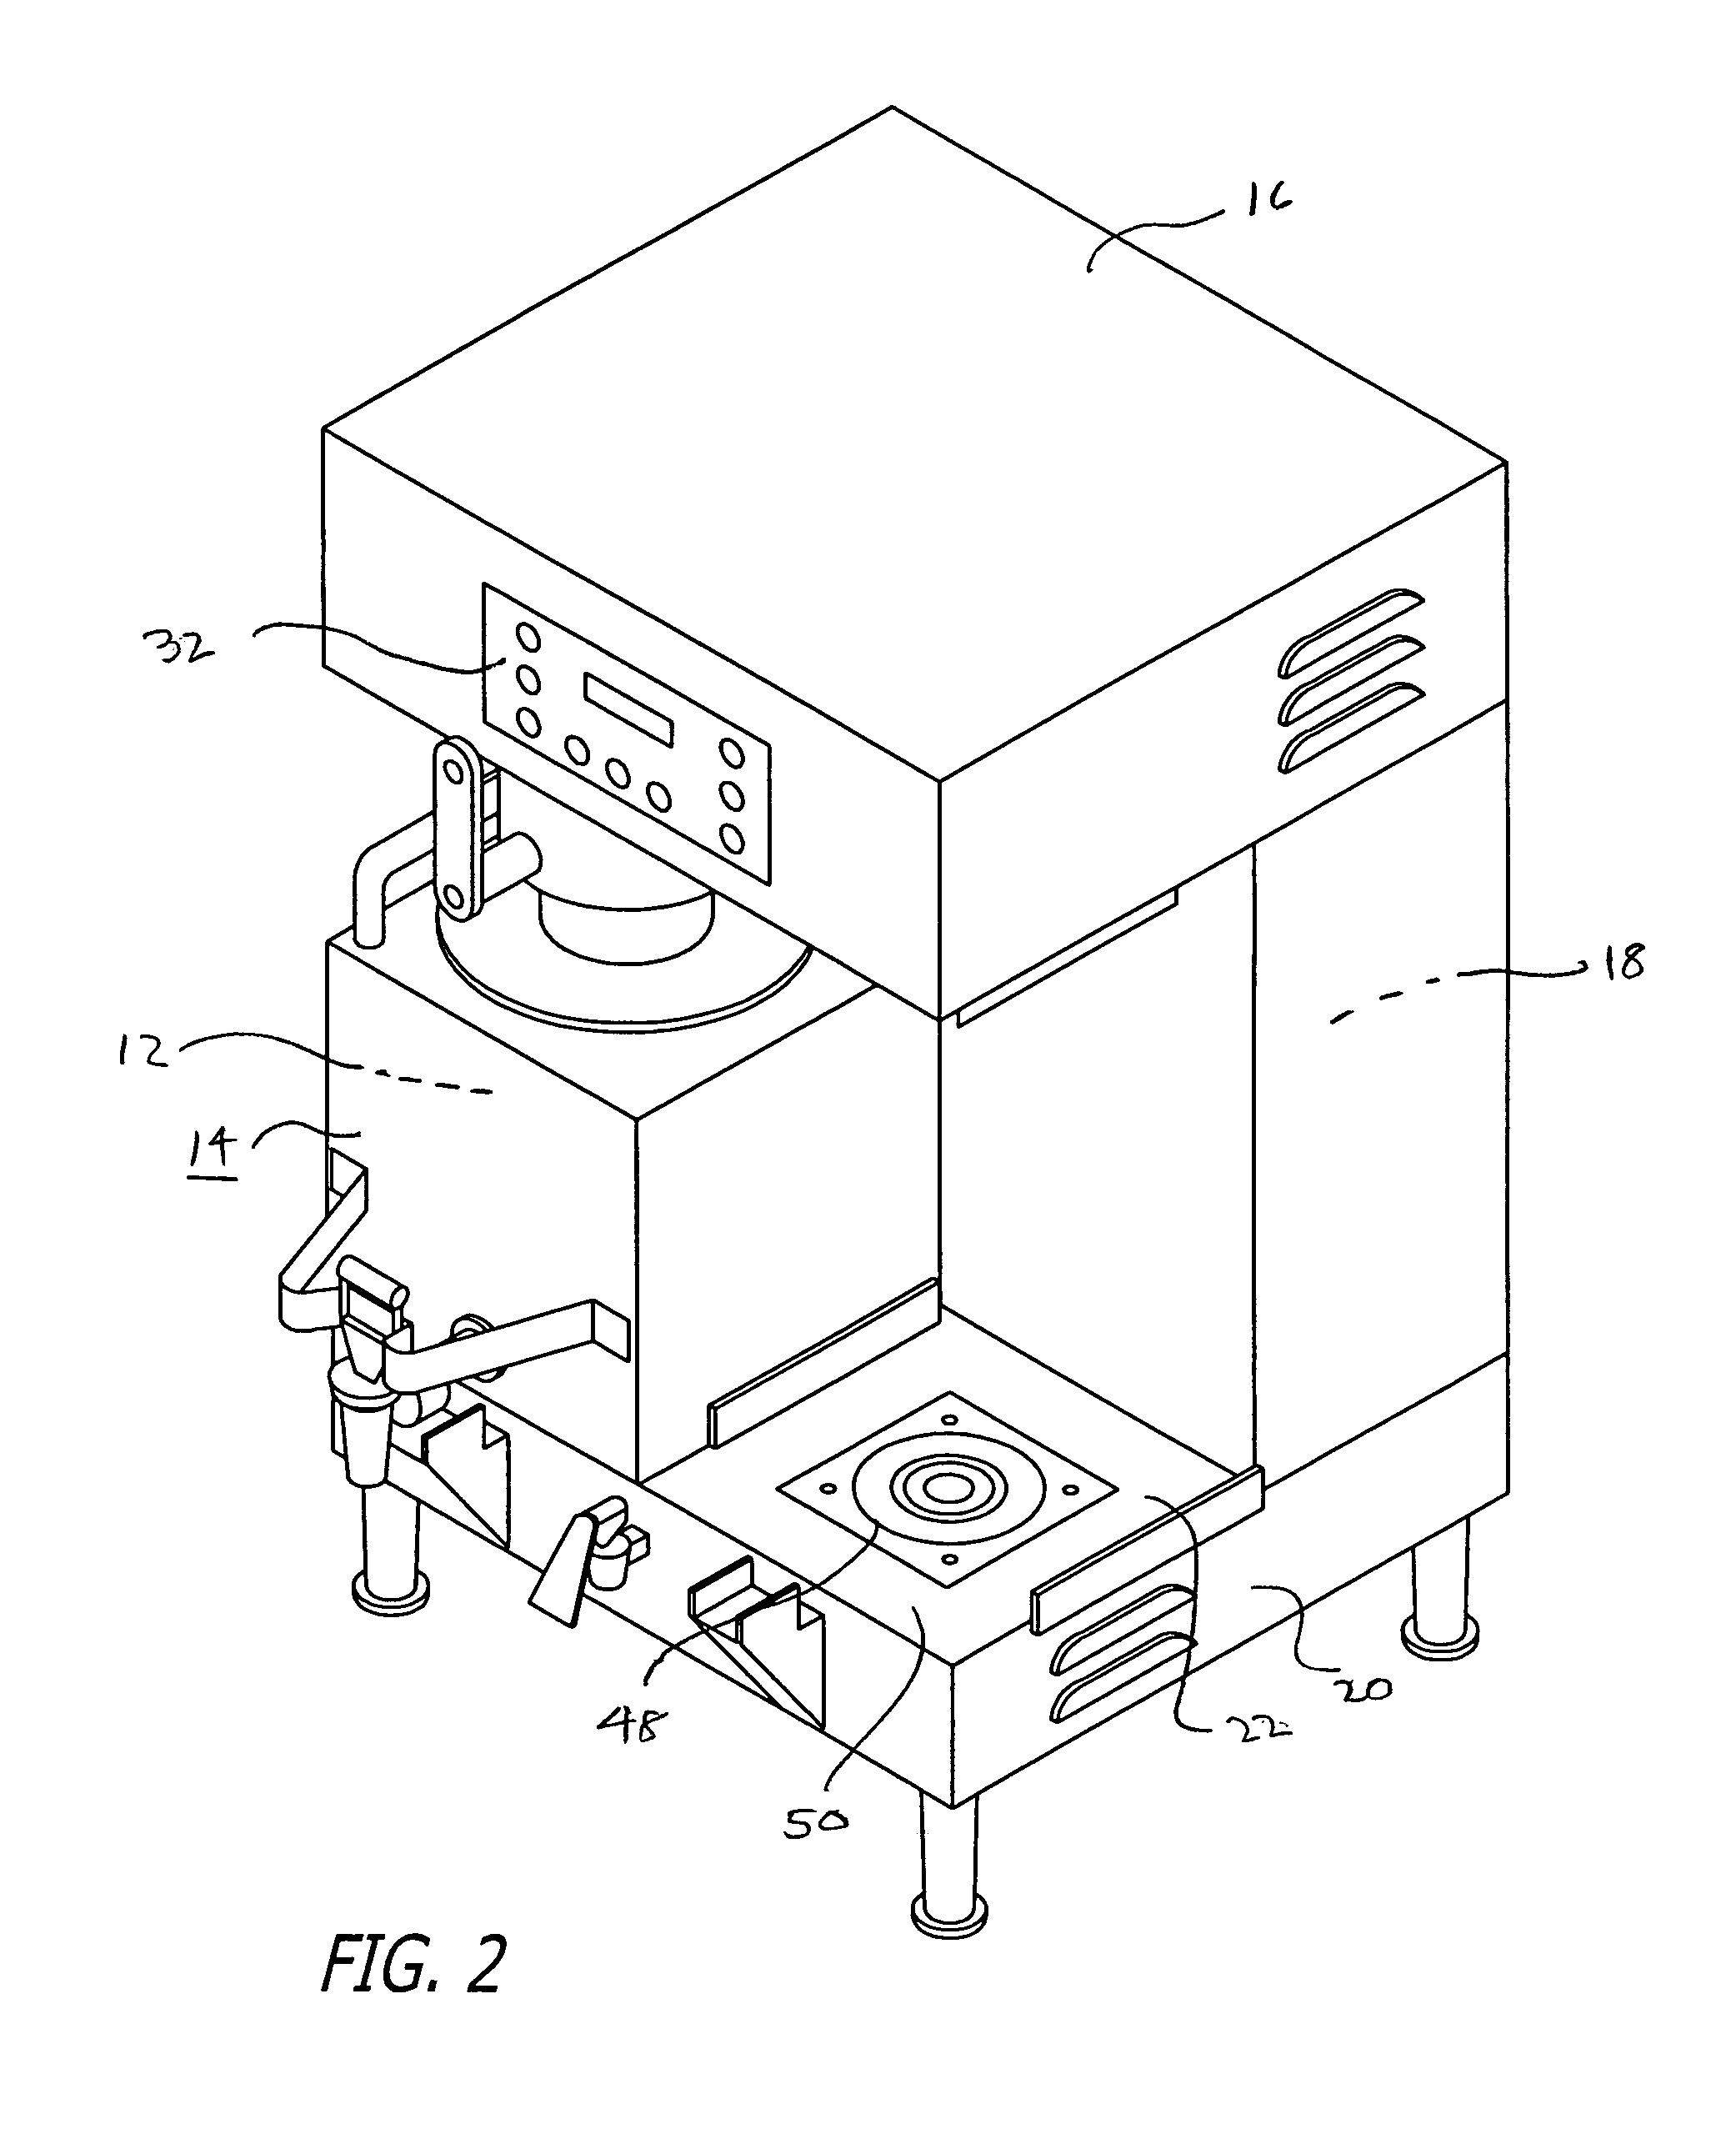 Brewing machine/satellite contactless power and communication transfer-enabling system and method